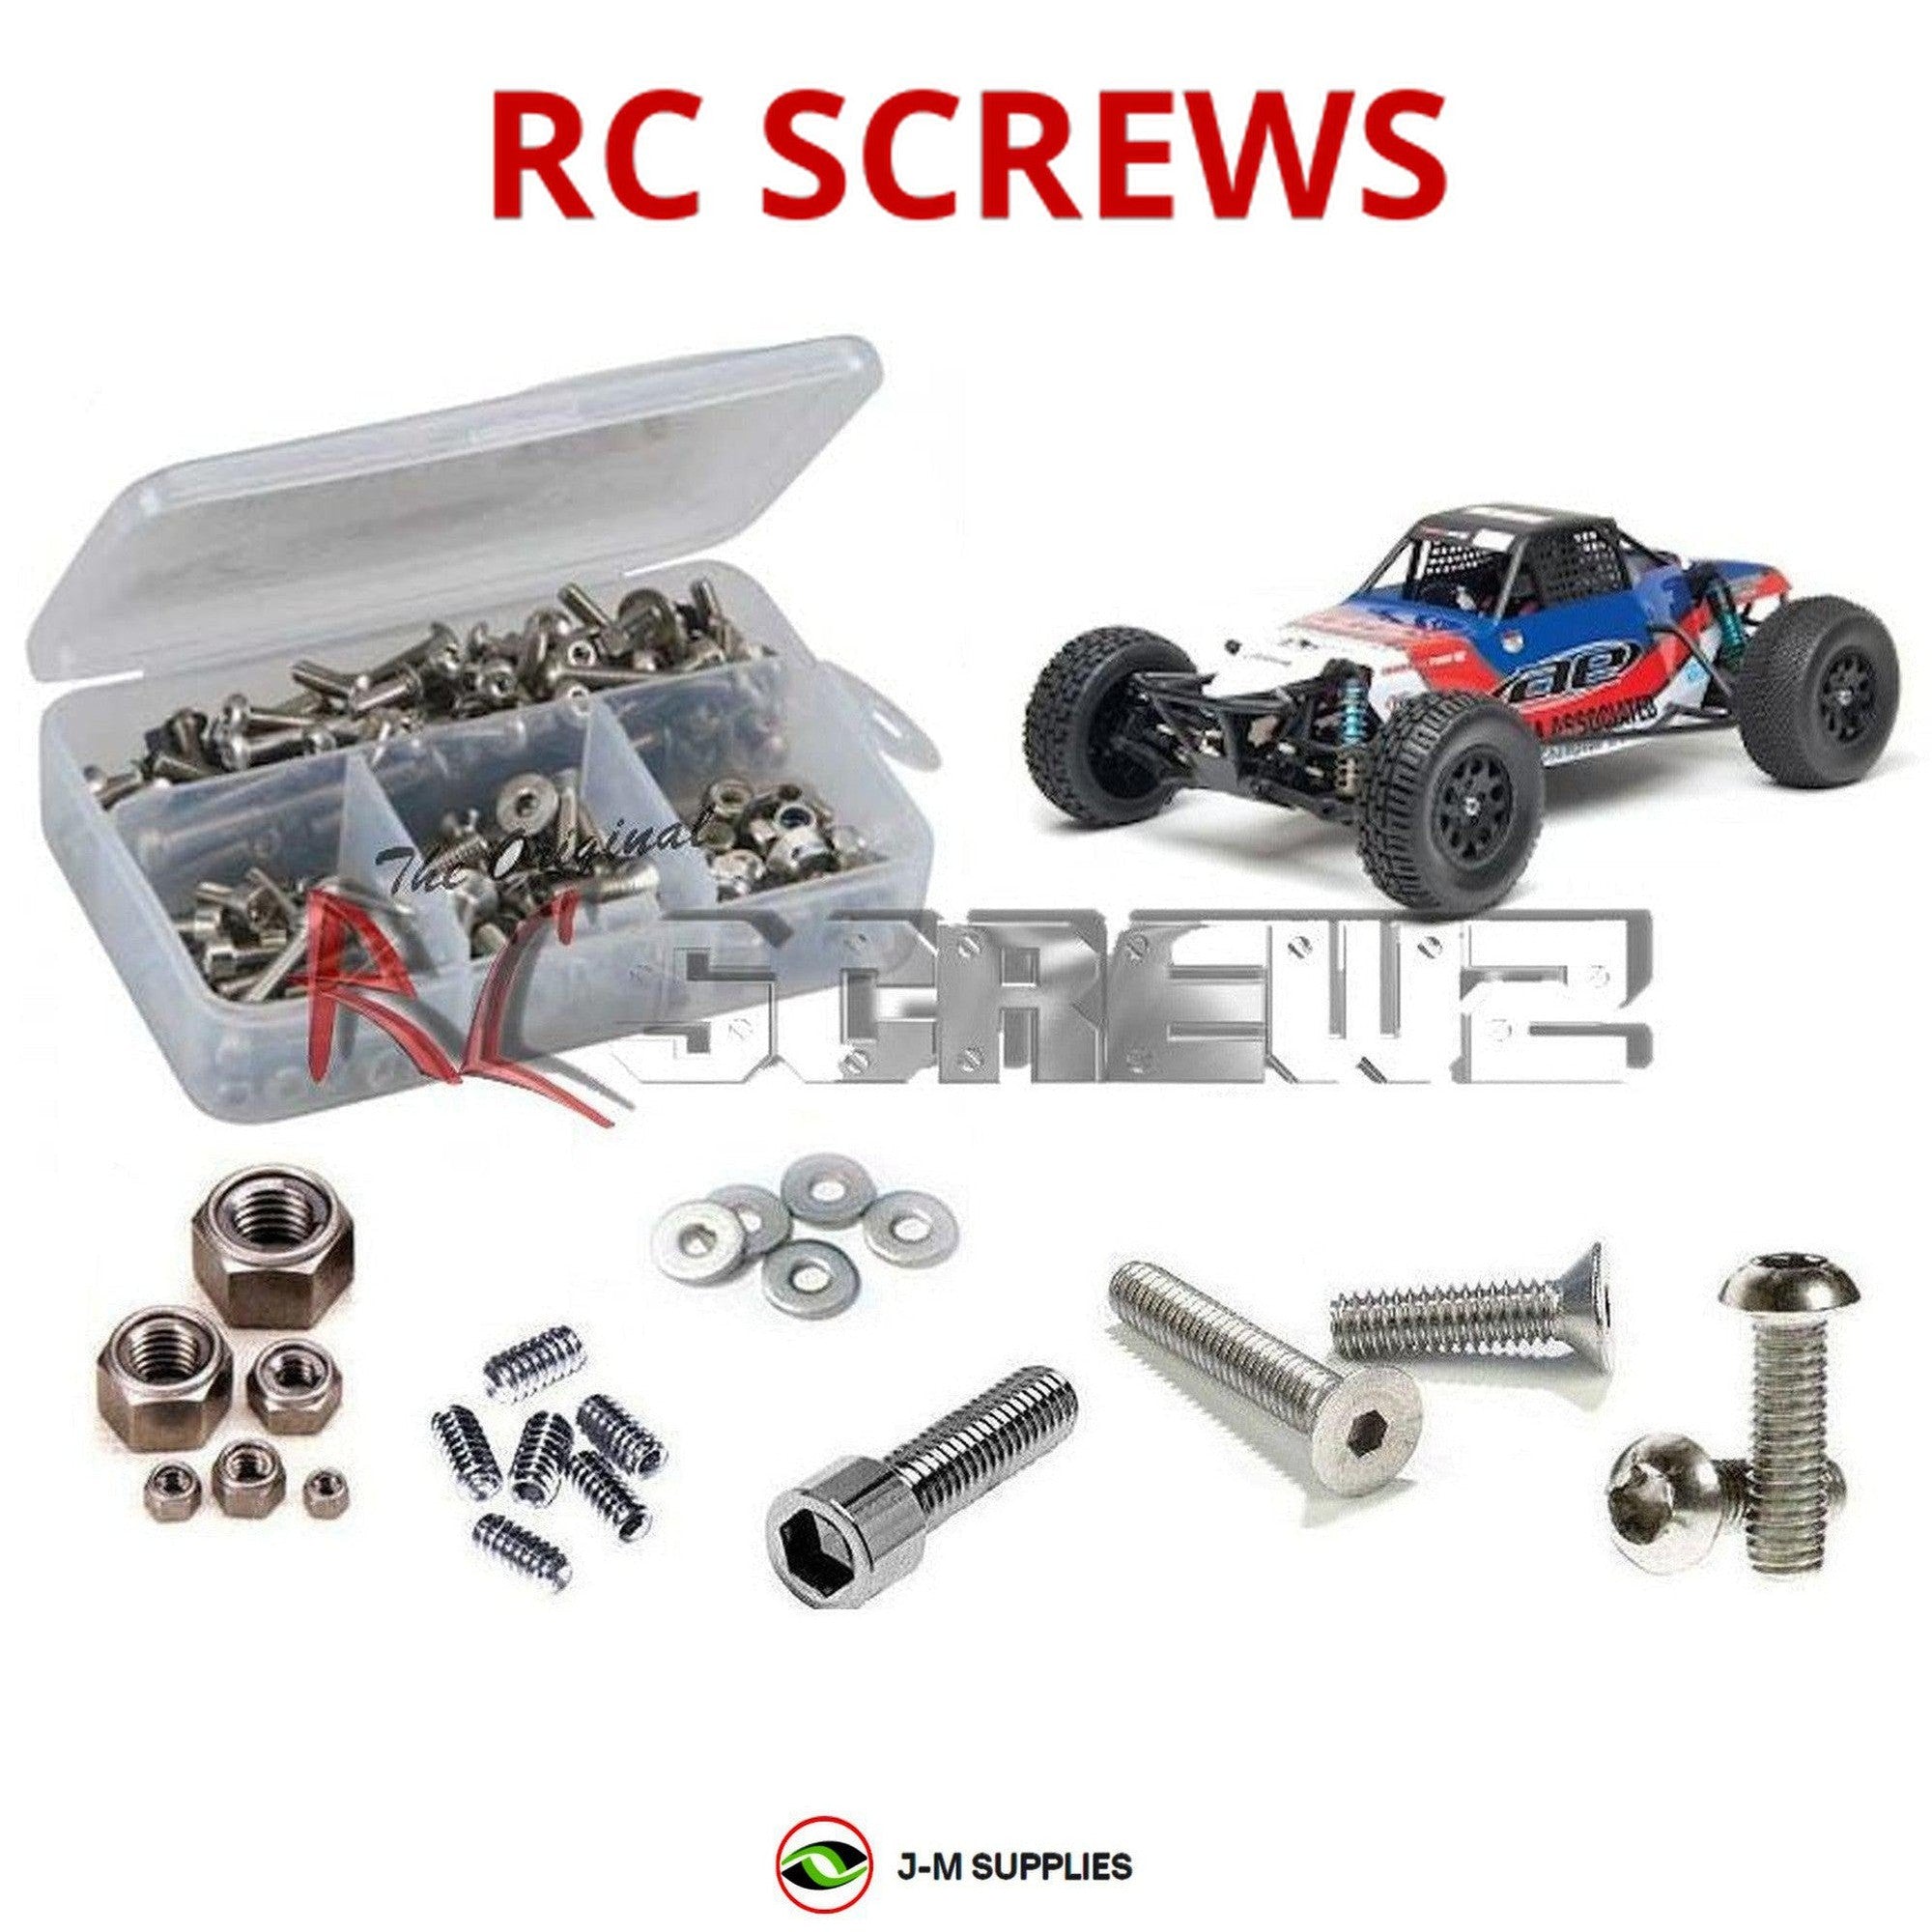 RCScrewZ Stainless Screw Kit+ ass049 for Associated SC10B/S #9050 | PRO - Picture 1 of 12